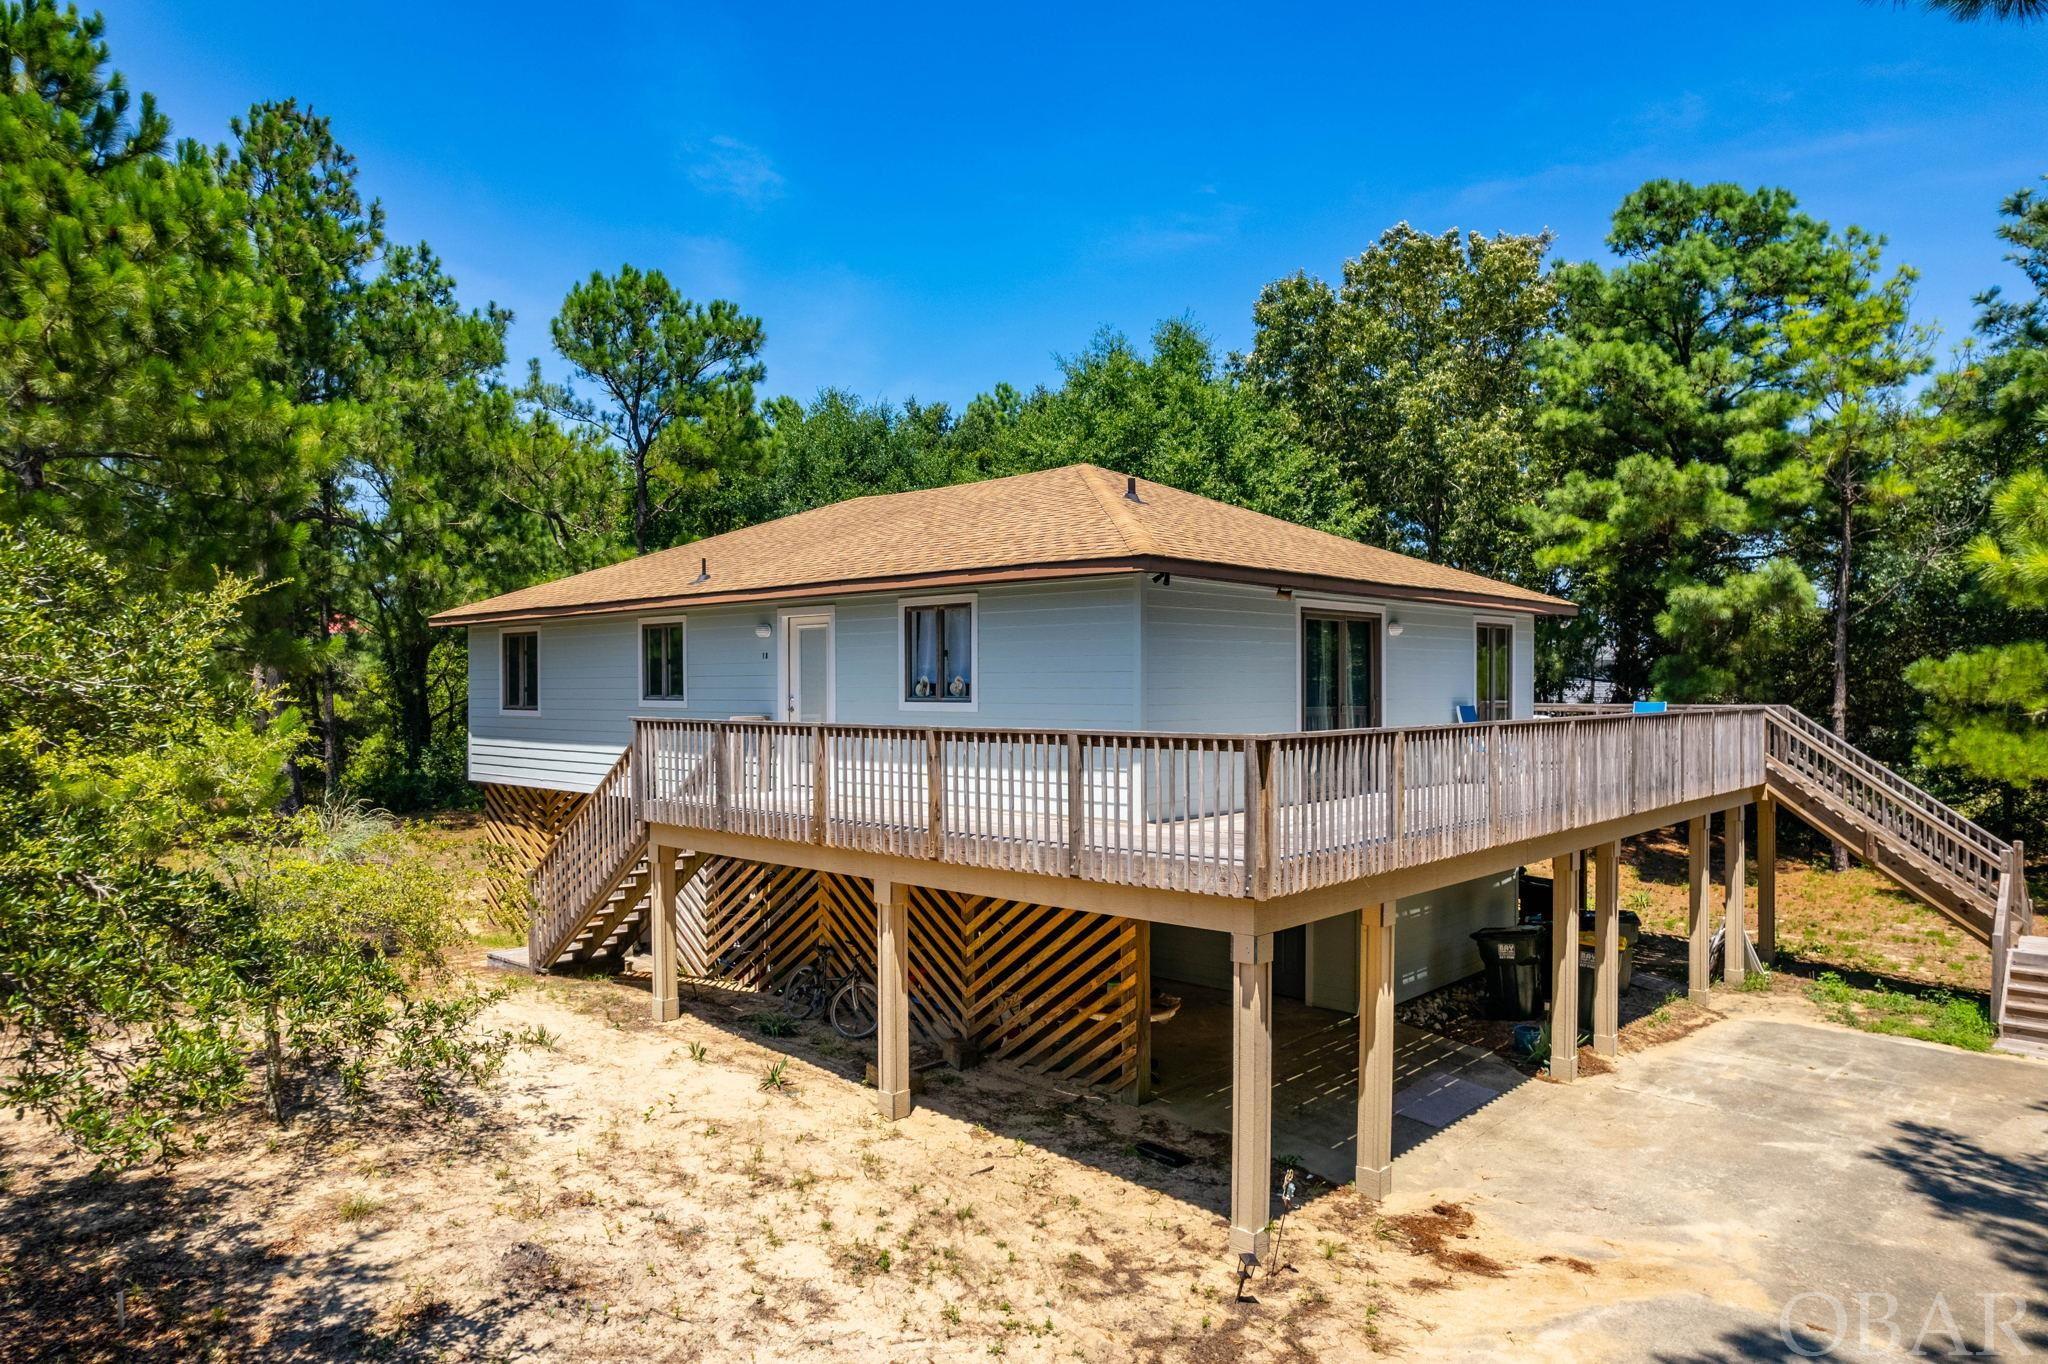 Check out this amazing Chicahauk opportunity! Located just a short distance to the Chicahauk Trail beach access which includes private parking. Nestled in the trees on a large private lot, this home has a lot to offer. The carport and covered entryway leads to the newly enclosed and permitted ground floor living space. This area provides the 4th bedroom ensuite, a den, and laundry facilities. Heading up the new interior staircase, you will find an open living, dining, and kitchen concept with vaulted, wood-beamed ceilings, 3 bedrooms, and 2 full bathrooms. There is new carpet throughout the home and gorgeous hardwood in the kitchen. The oversized primary bedroom has a cedar lined walk-in closet, private ensuite with new flooring and vanity, and sliding door access to the wrap-around porch. The other two bedrooms share a jack and jill bathroom on the opposite side of the living room. The spacious screen porch is desirable for long summer nights enjoying the outdoors. The entire home was recently re-sided with cement fiber board and painted. Come see for yourself today and start enjoying all Southern Shores has to offer!